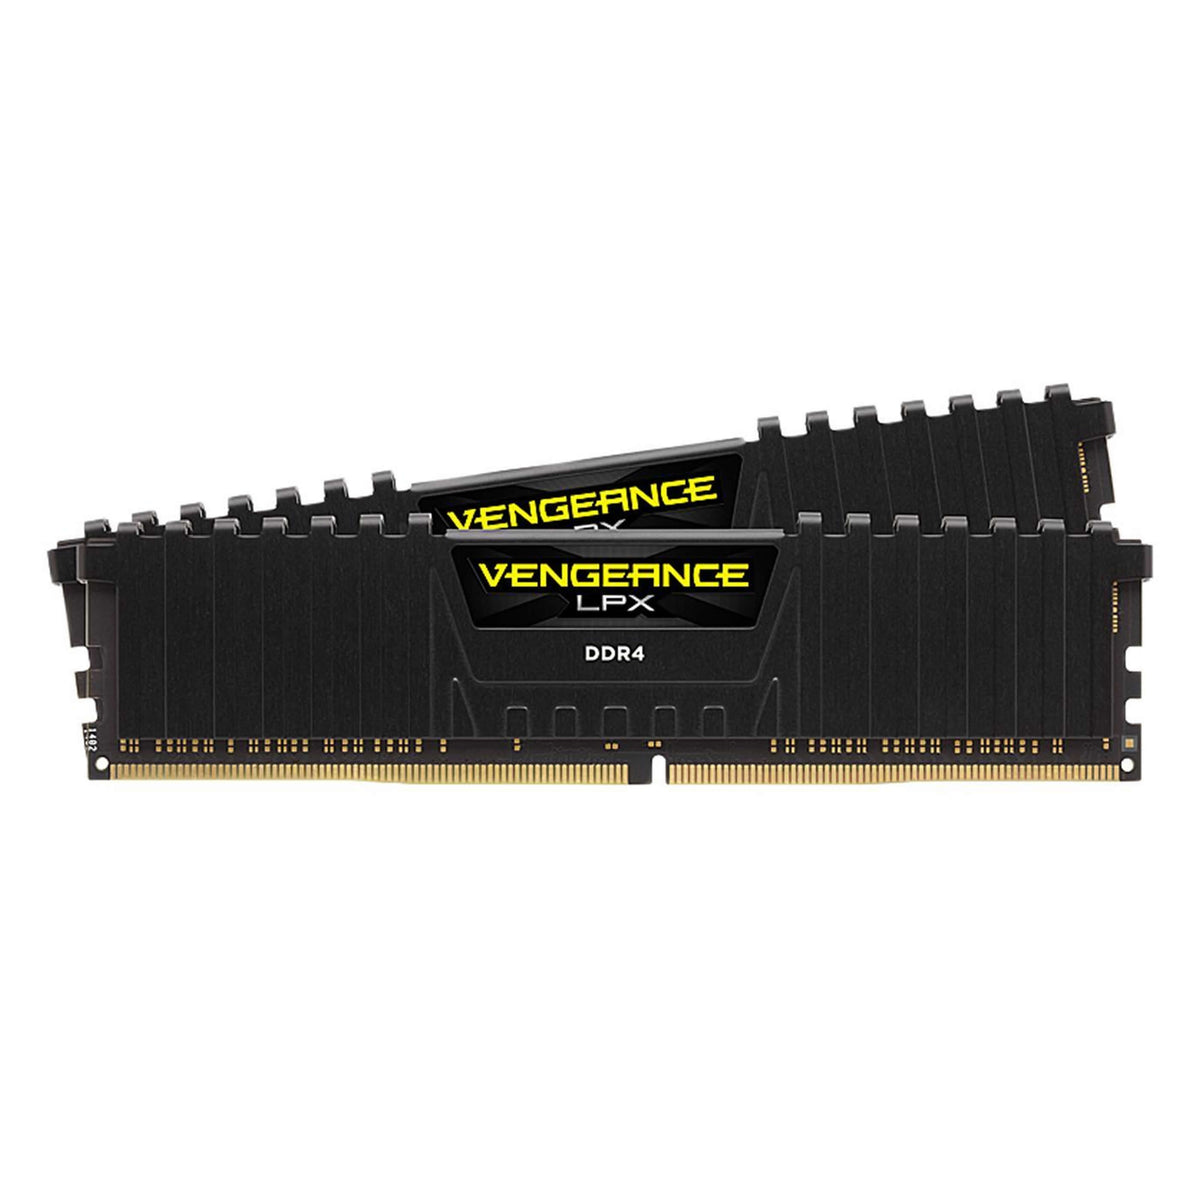 Maxxwave DDR4 Memory 64GB for — Baltic Networks